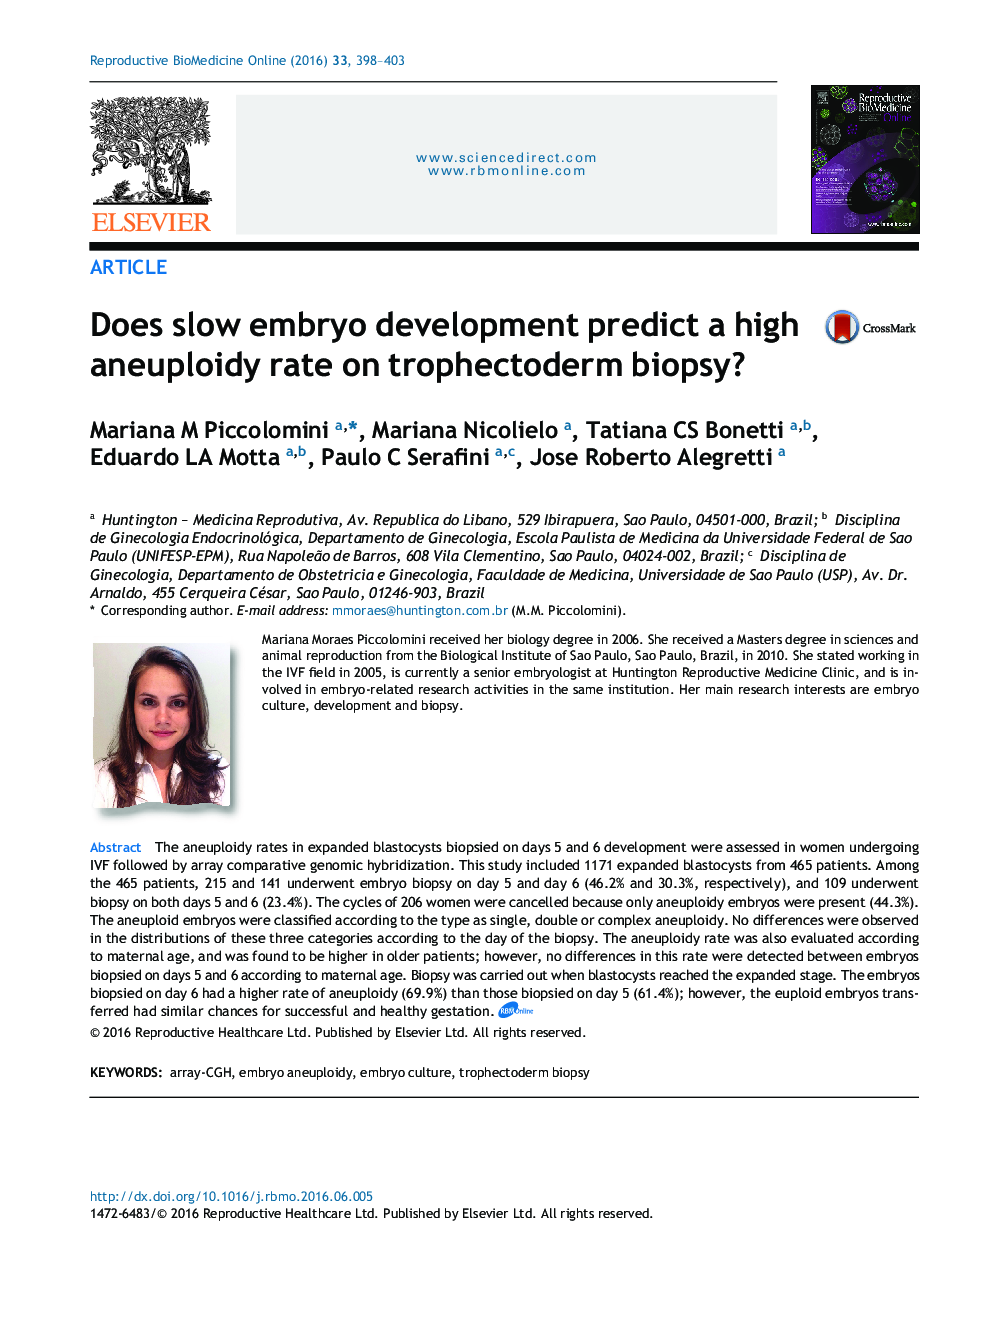 Does slow embryo development predict a high aneuploidy rate on trophectoderm biopsy?